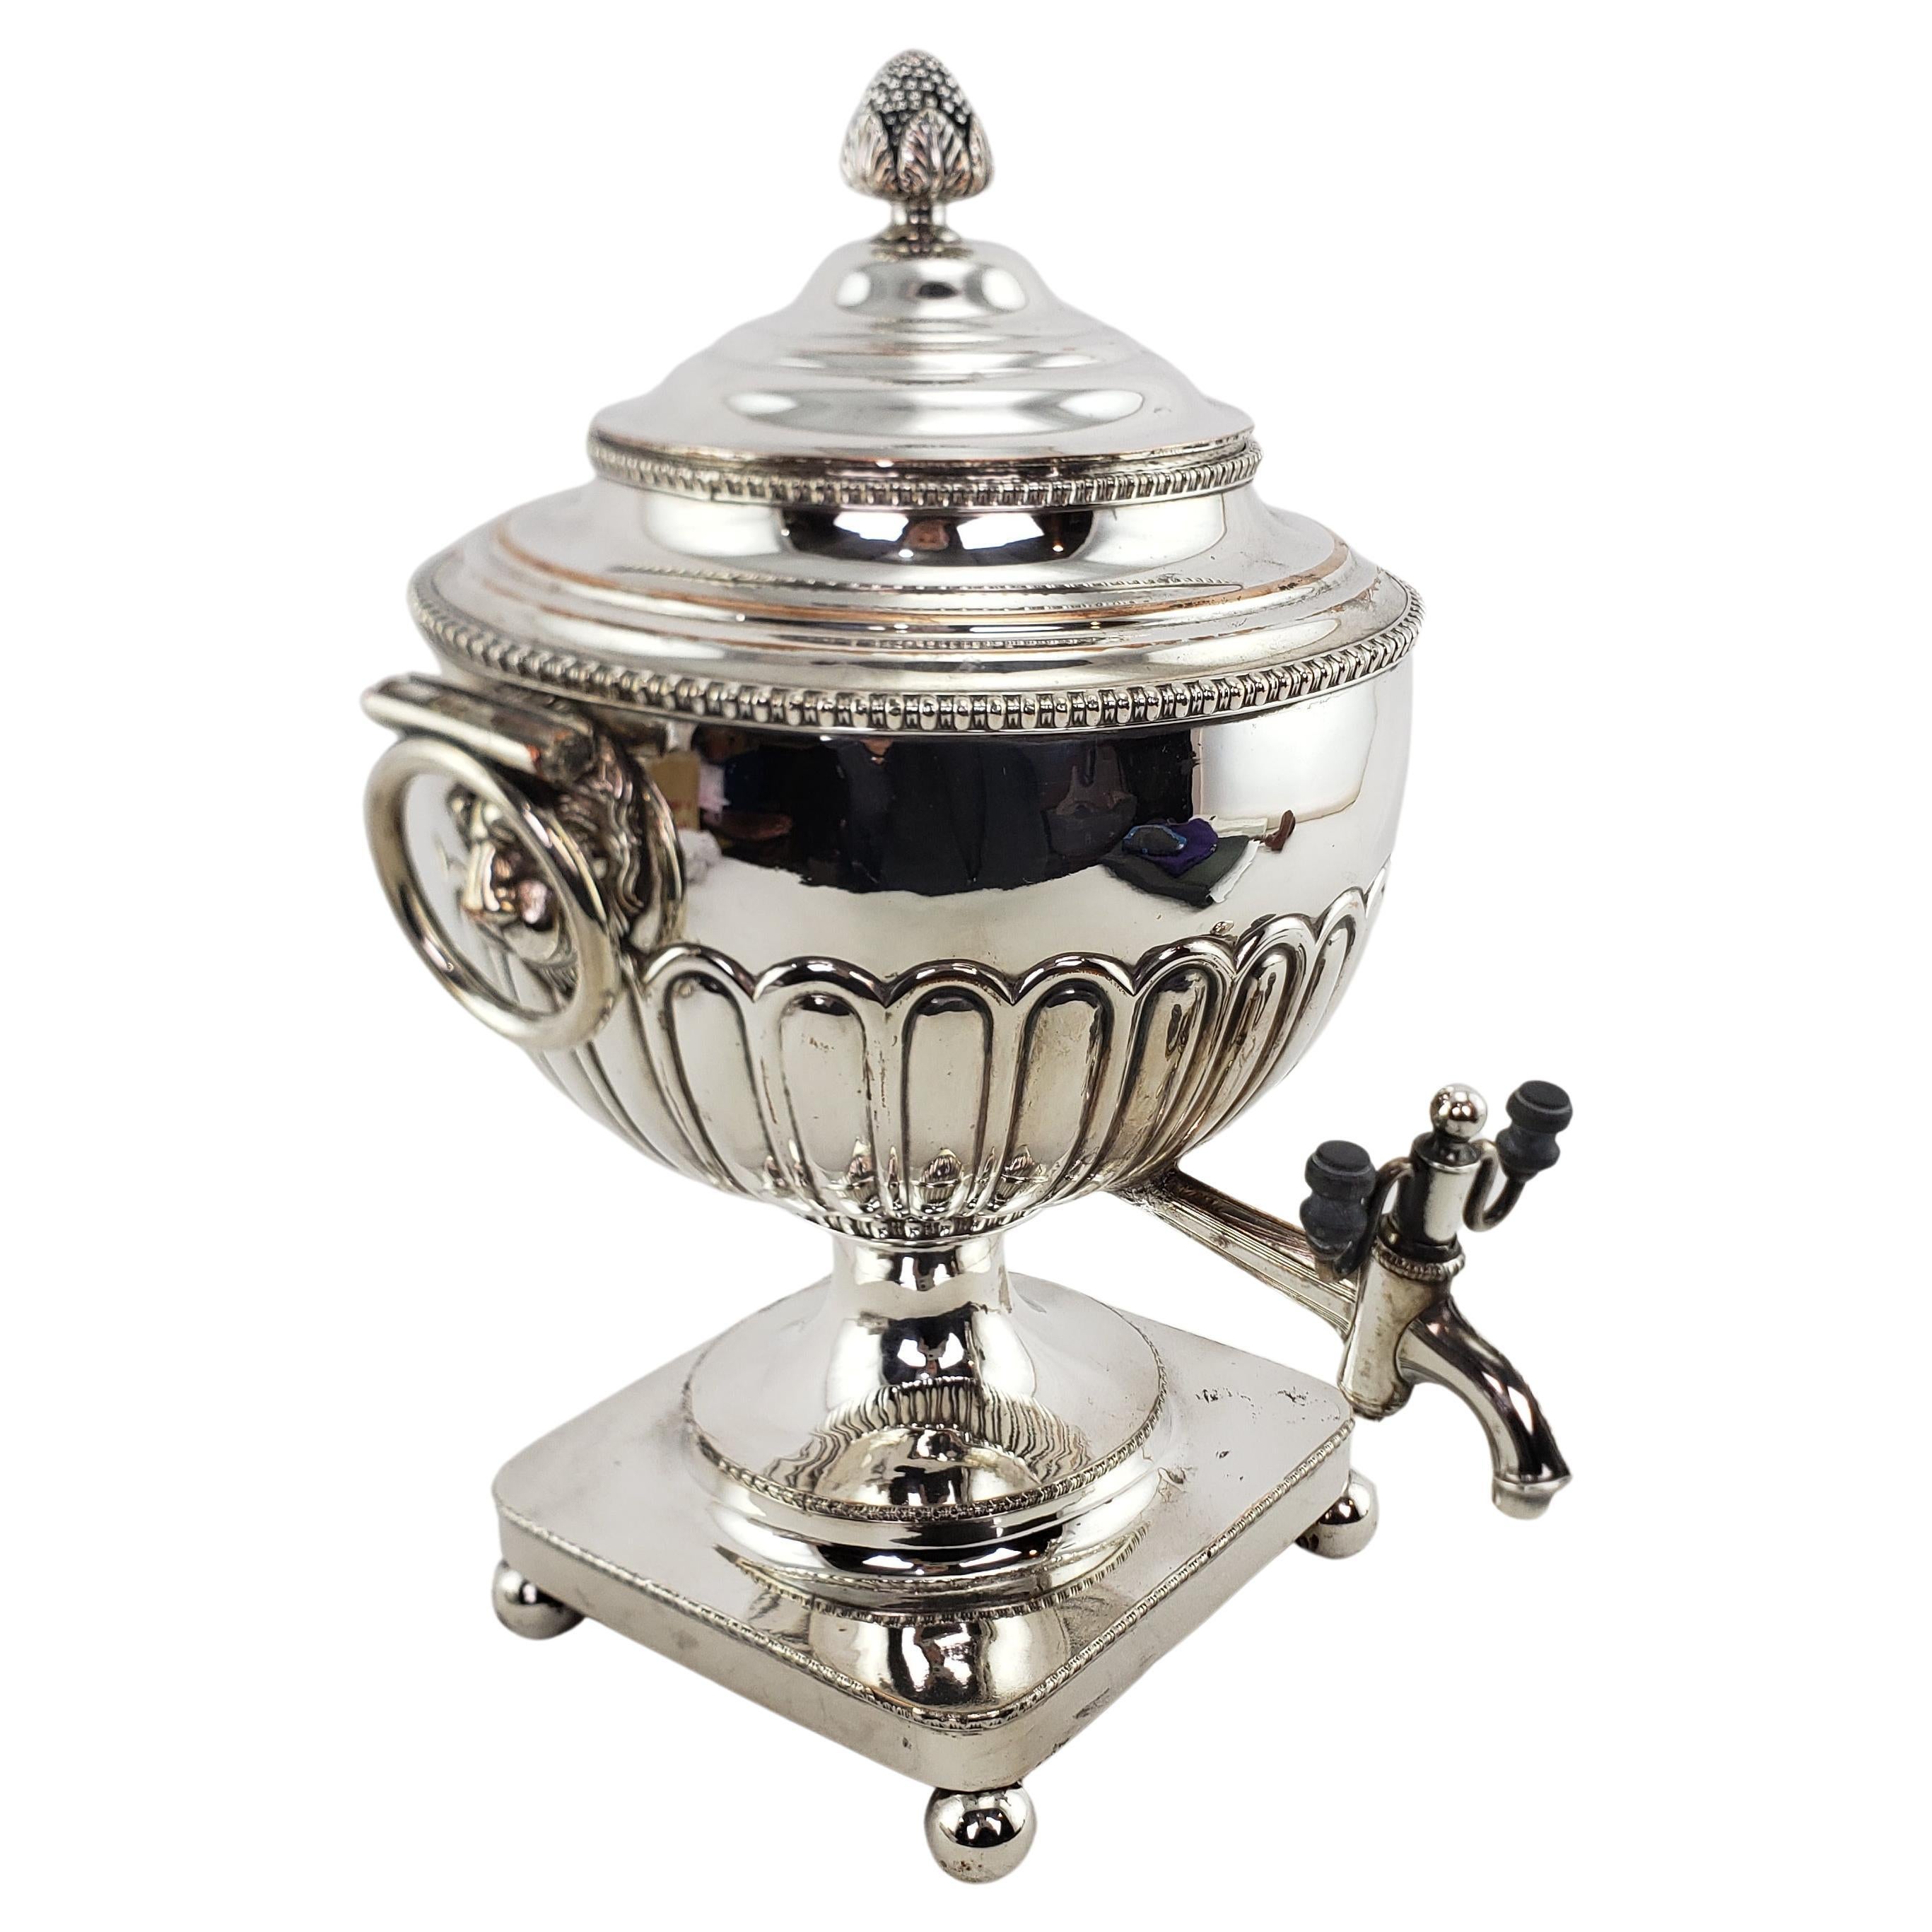 Antique Georgian Styled Silver Plated Tea or Hot Water Urn with Lion Mounts For Sale